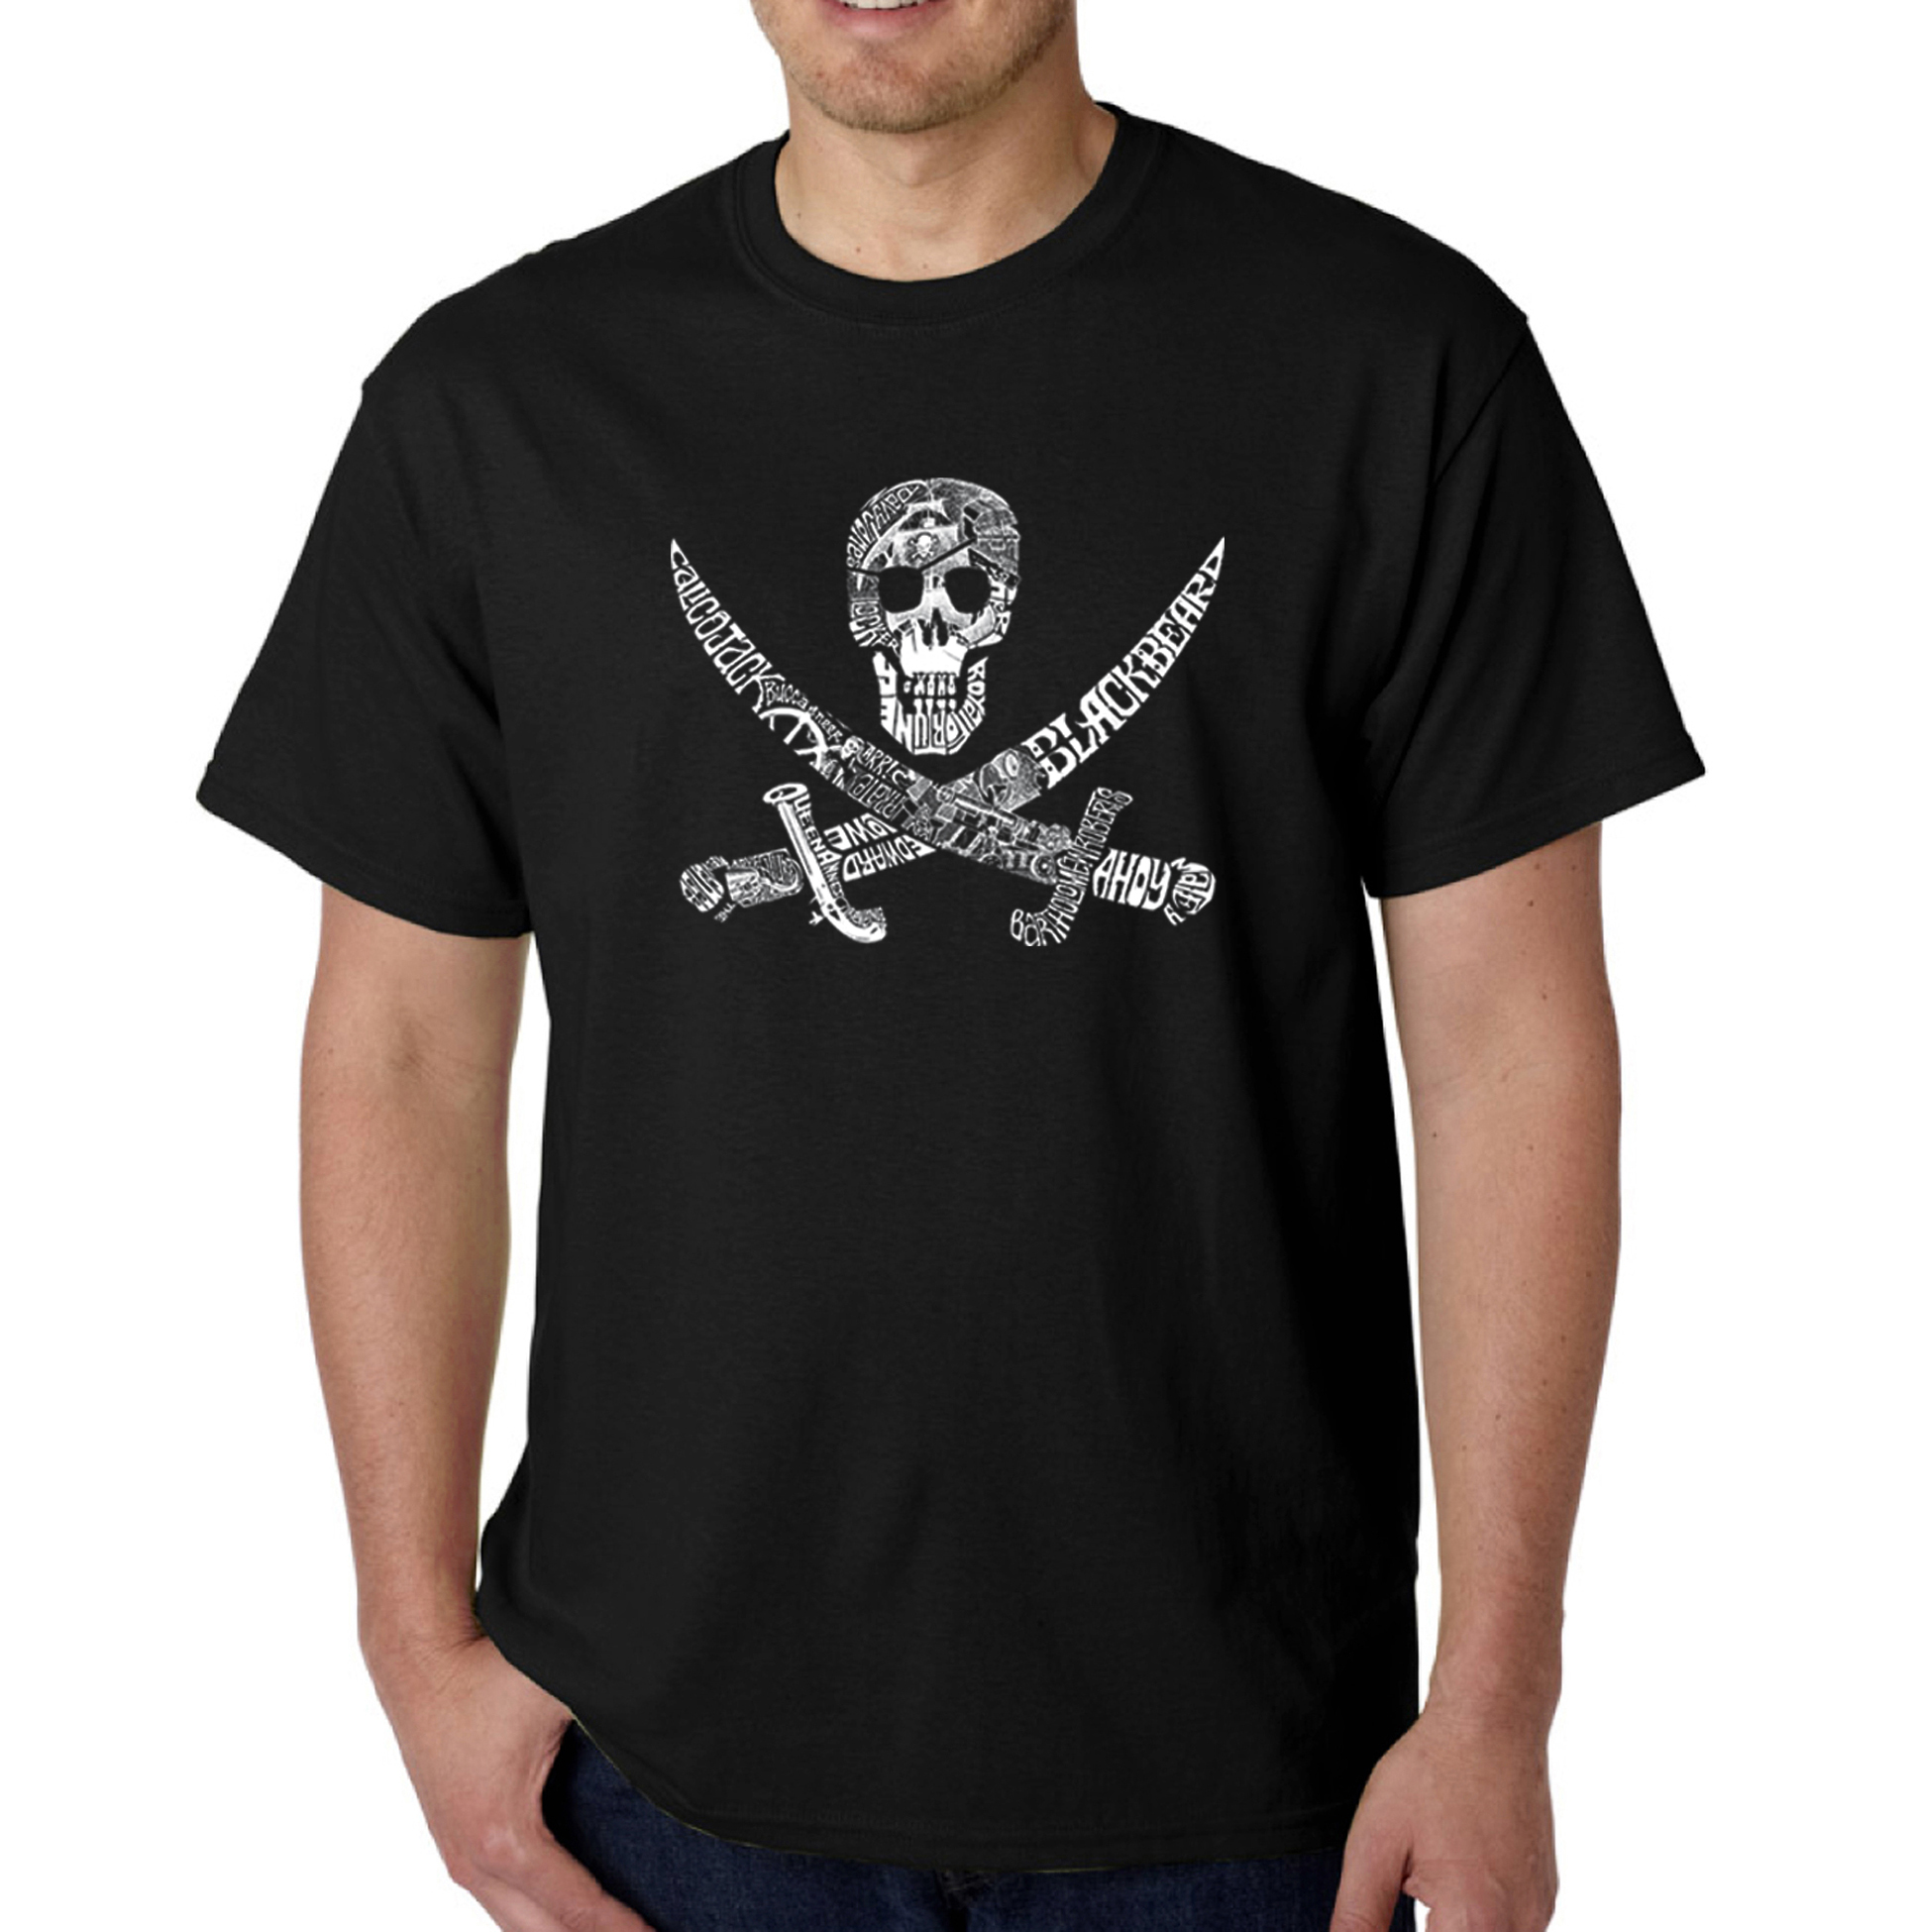 Los Angeles Pop Art Men's Big & Tall Word Art T-shirt - Pirate Captains, Ships and Imagery